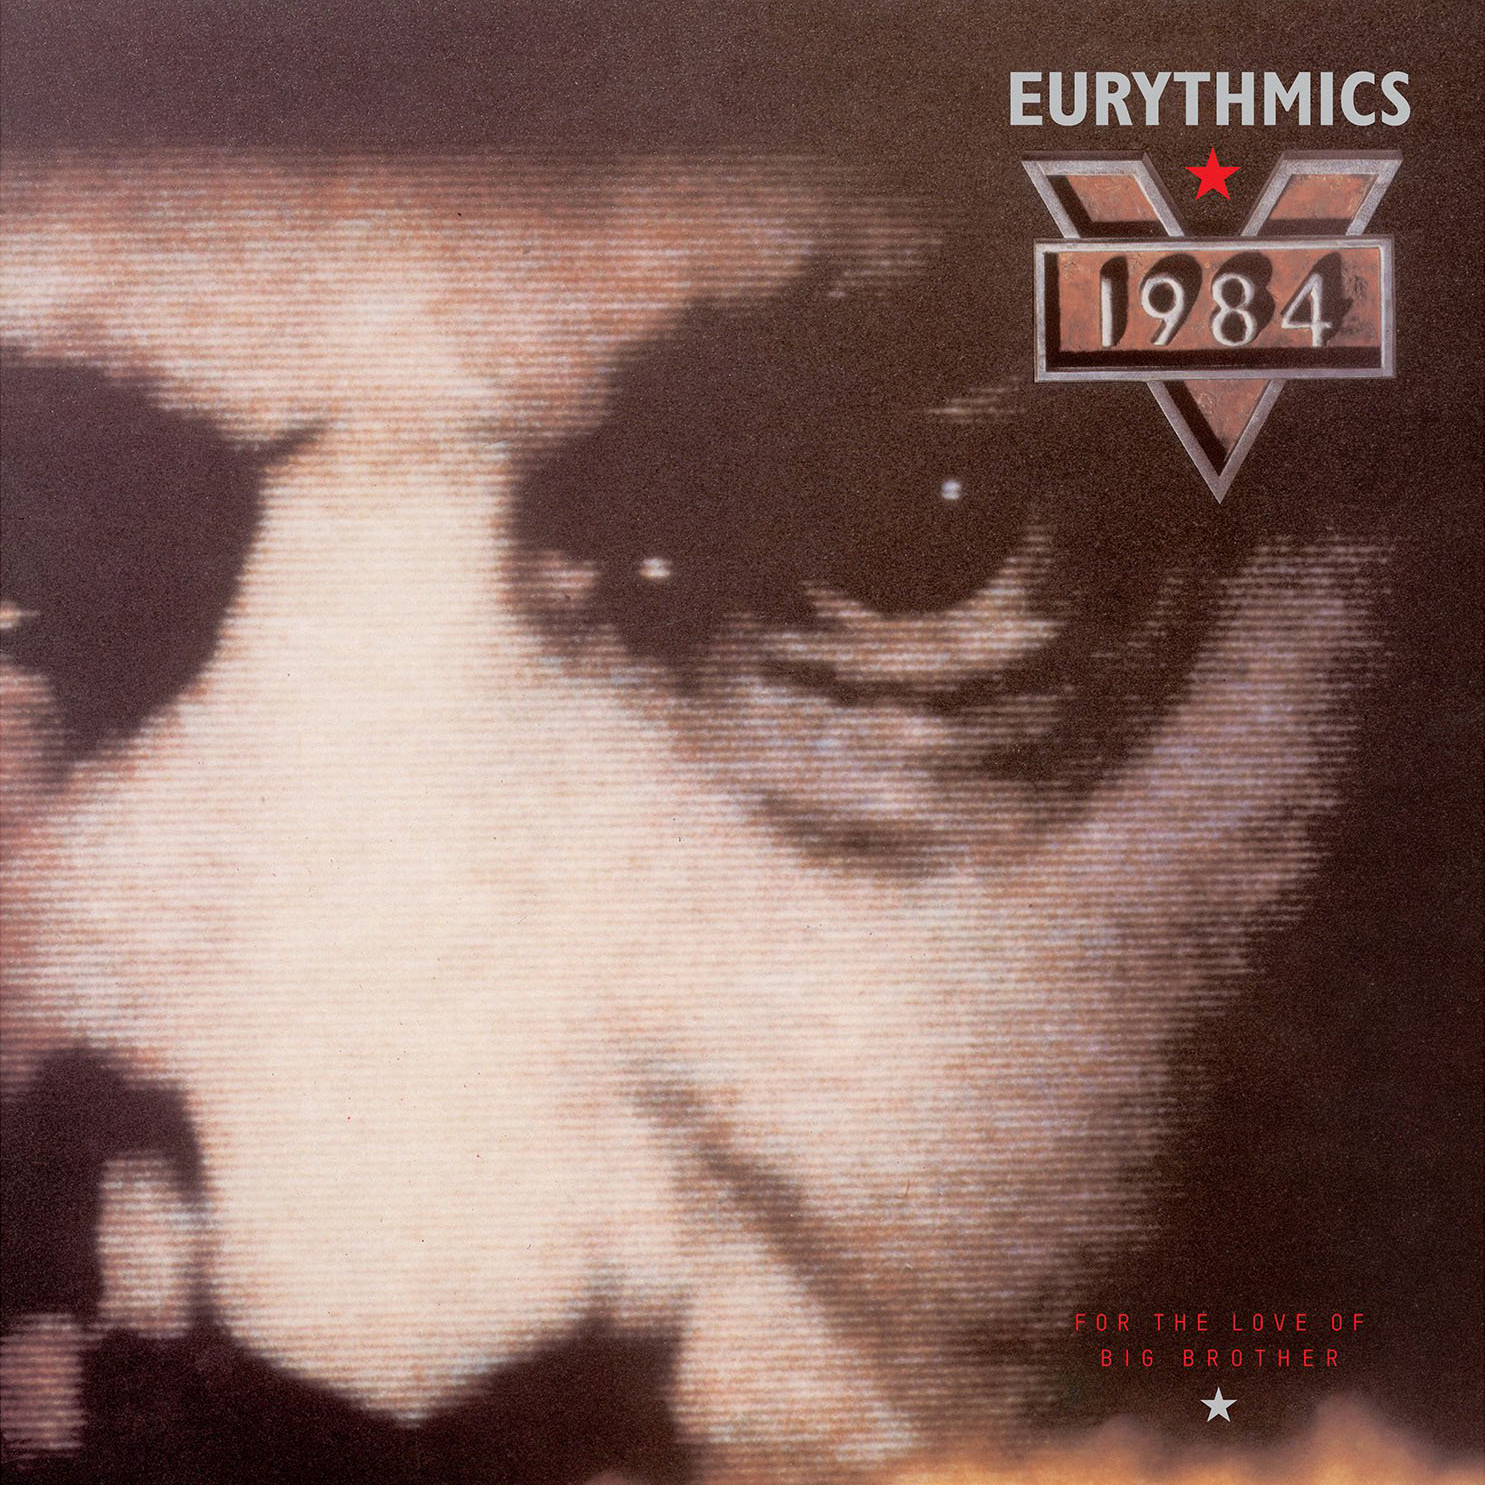 Eurythmics - 1984: For the Love of Big Brother (Remastered) (2018) [FLAC 24bit/96kHz]